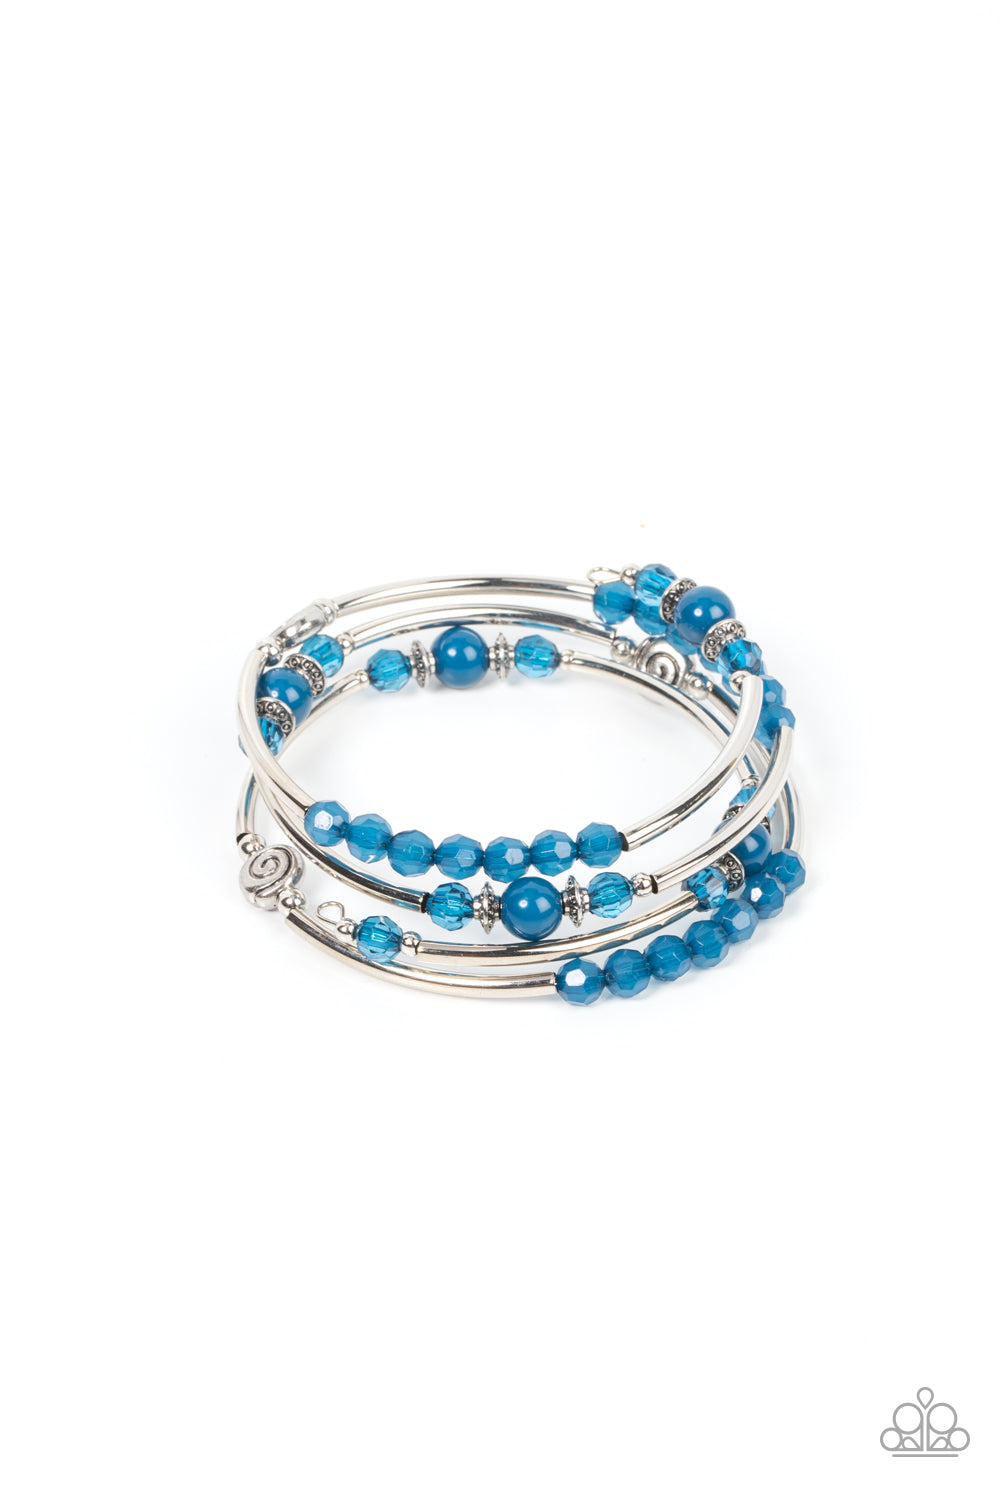 Whimsically Whirly - Blue Bracelet - Paparazzi Accessories